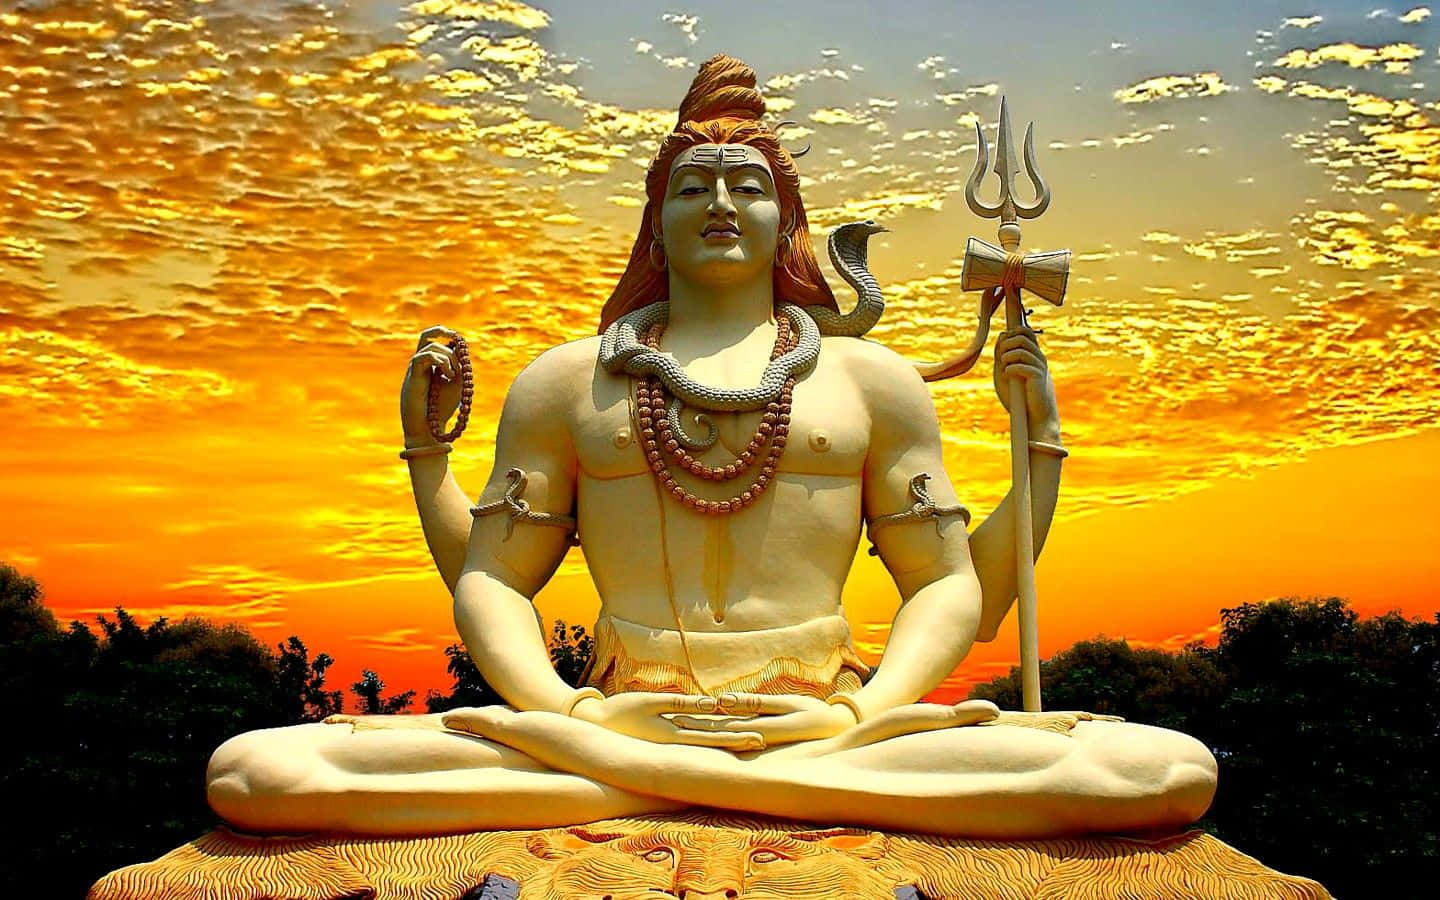 Top collection about god shiva (shankar) Photos, images, wallpaper, status